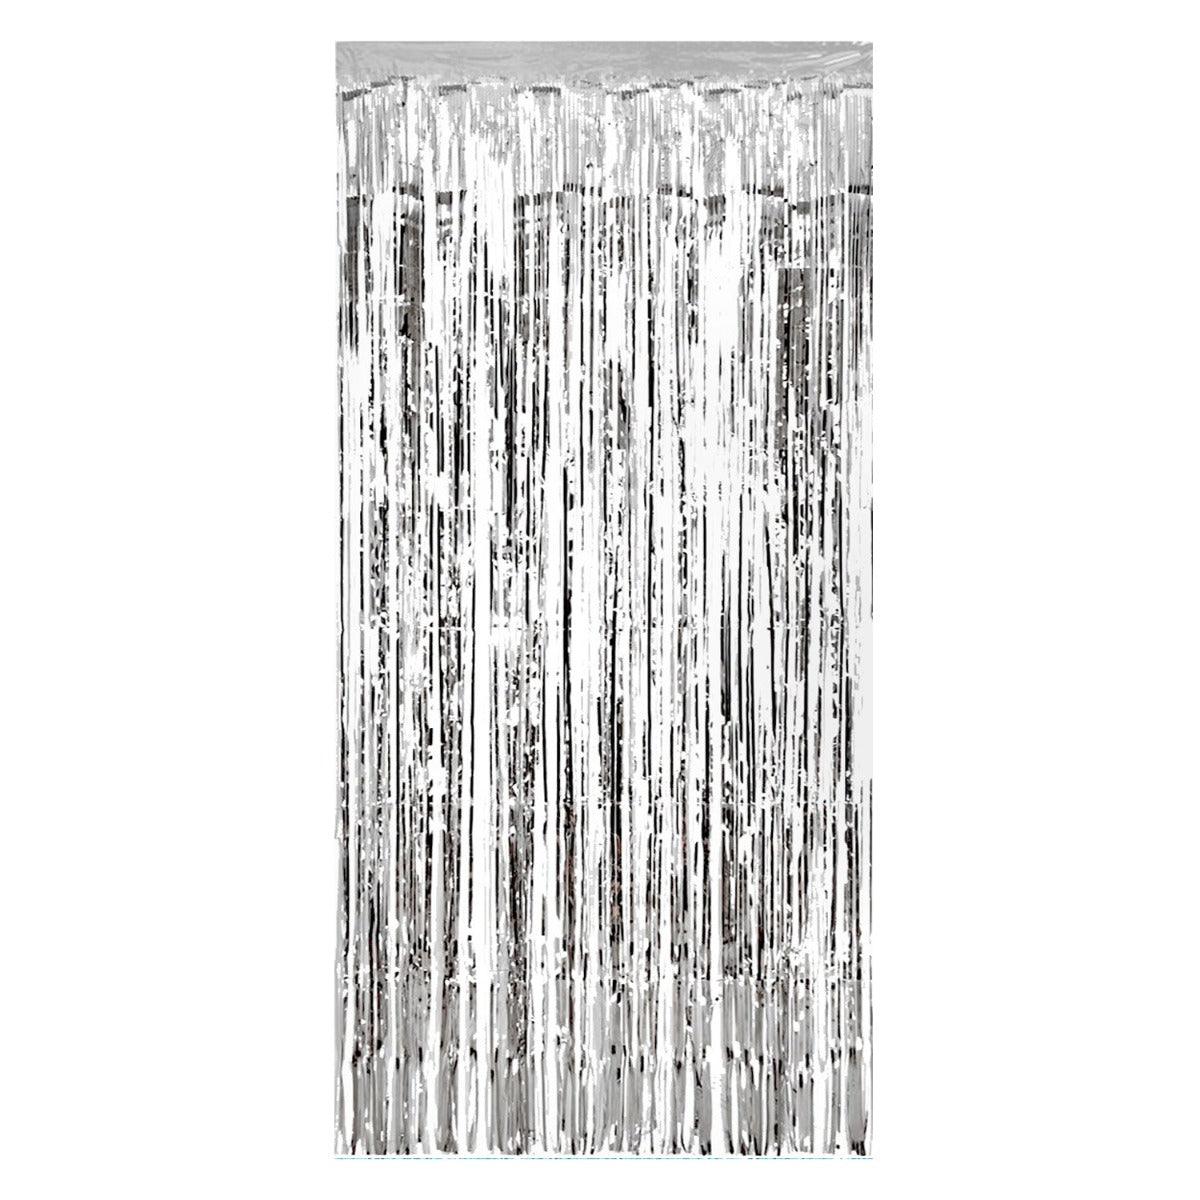 PartyCorp Big Silver Foil Curtain Fringe Set, 1 Pack